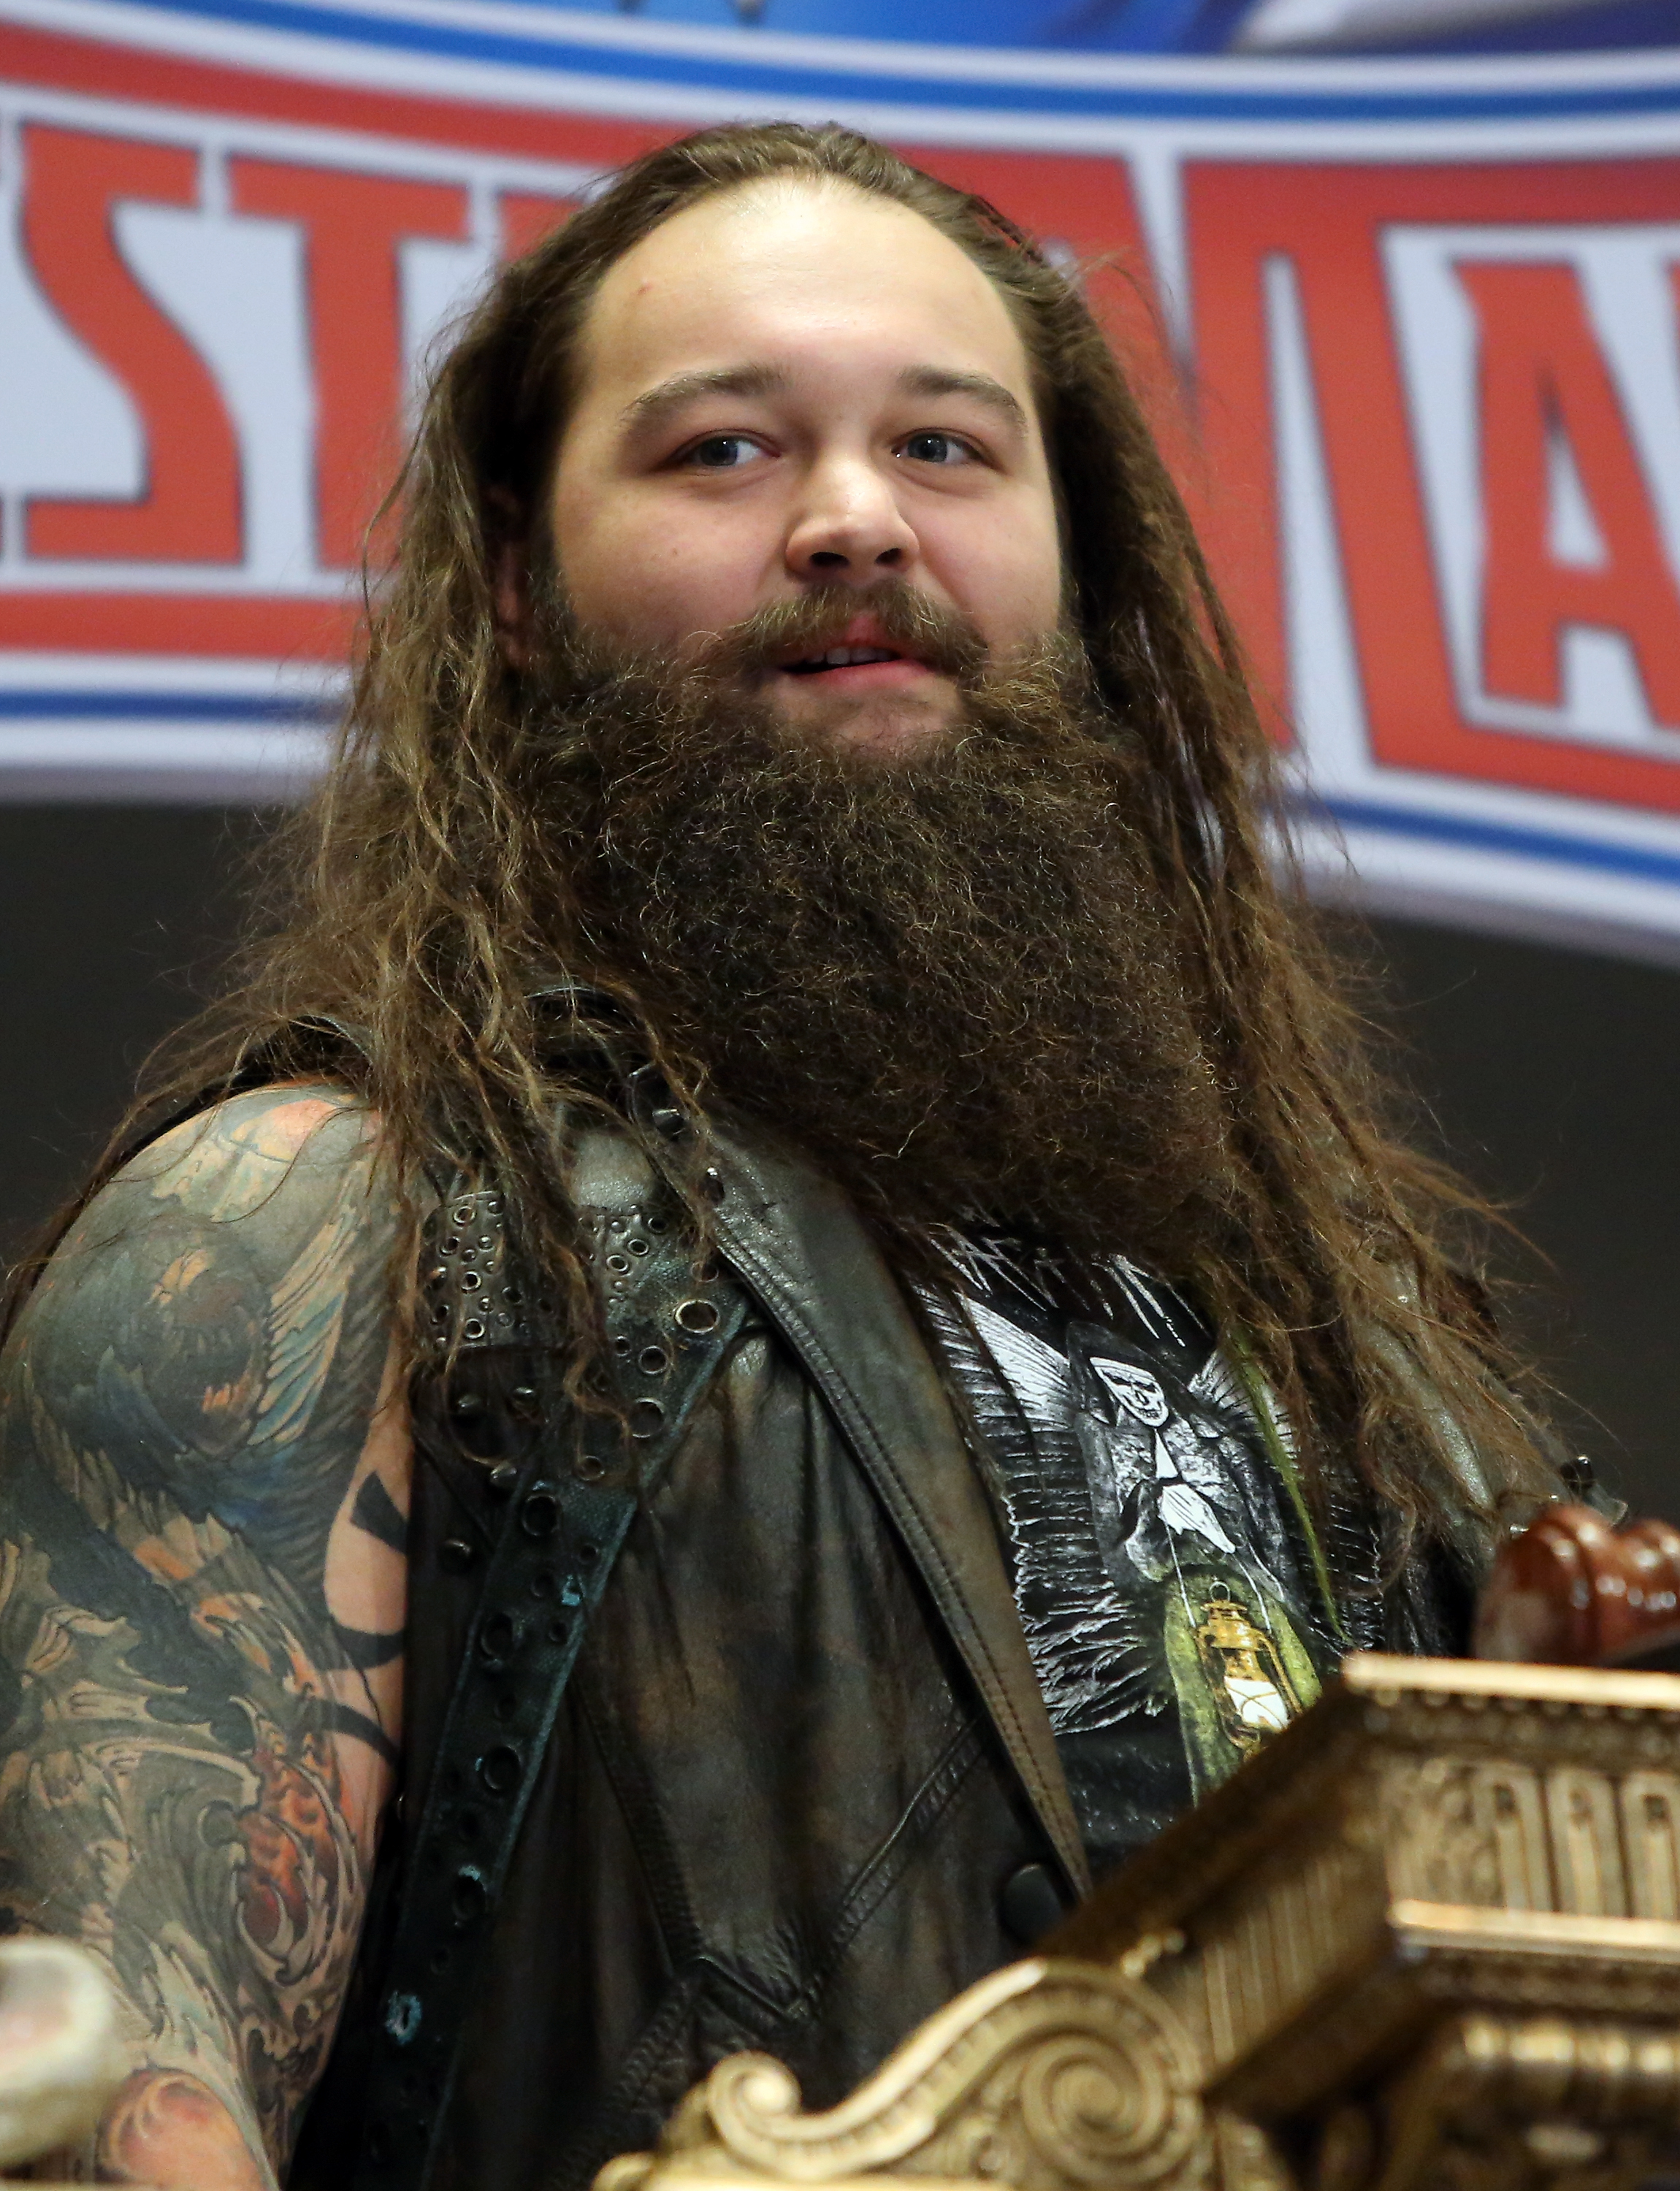 Bray Wyatt on March 29, 2016 in New York City | Source: Getty Images